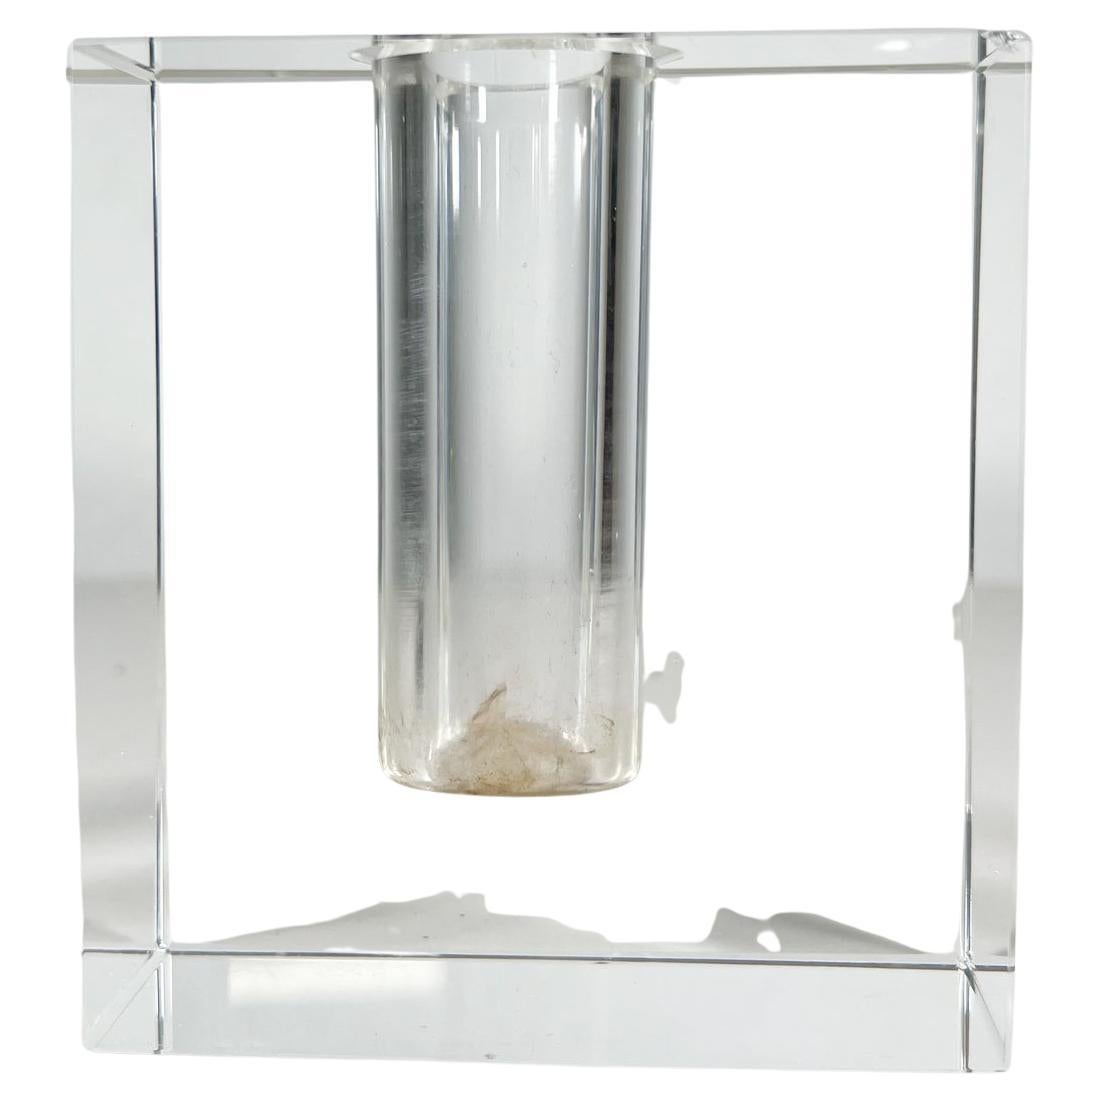 1970s Modernist sophisticated bud vase clear glass rectangular block.
Thick glass ultramodern
Measures: 4 wide x 1.88 deep x 4.32 tall
Preowned original vintage condition.
See images.